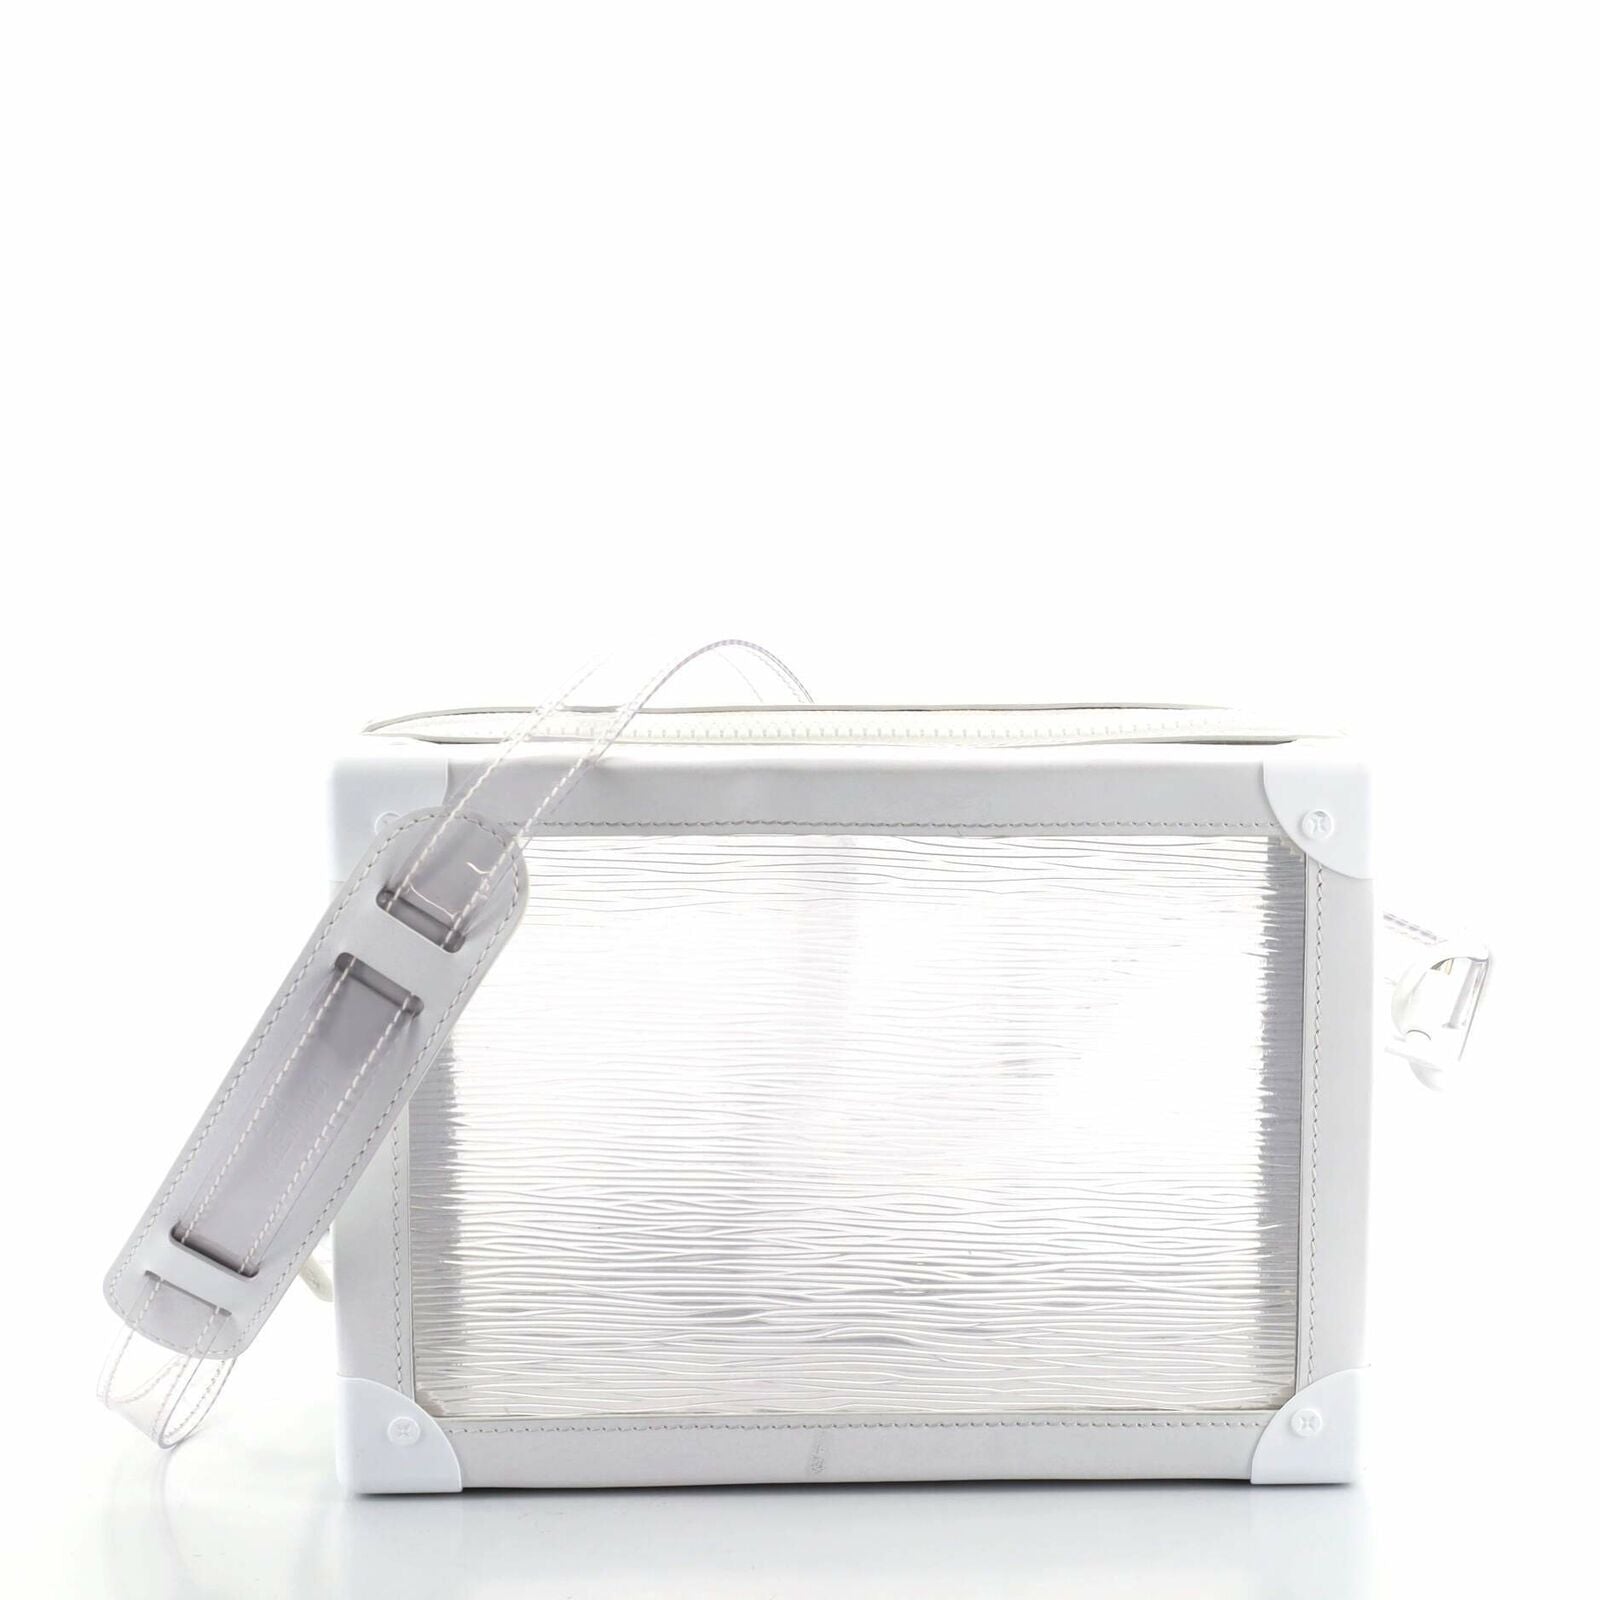 Clear Louis Vuitton Bags - 31 For Sale on 1stDibs  transparent louis  vuitton clear bag, transparent bag louis vuitton, small clear louis vuitton  bag